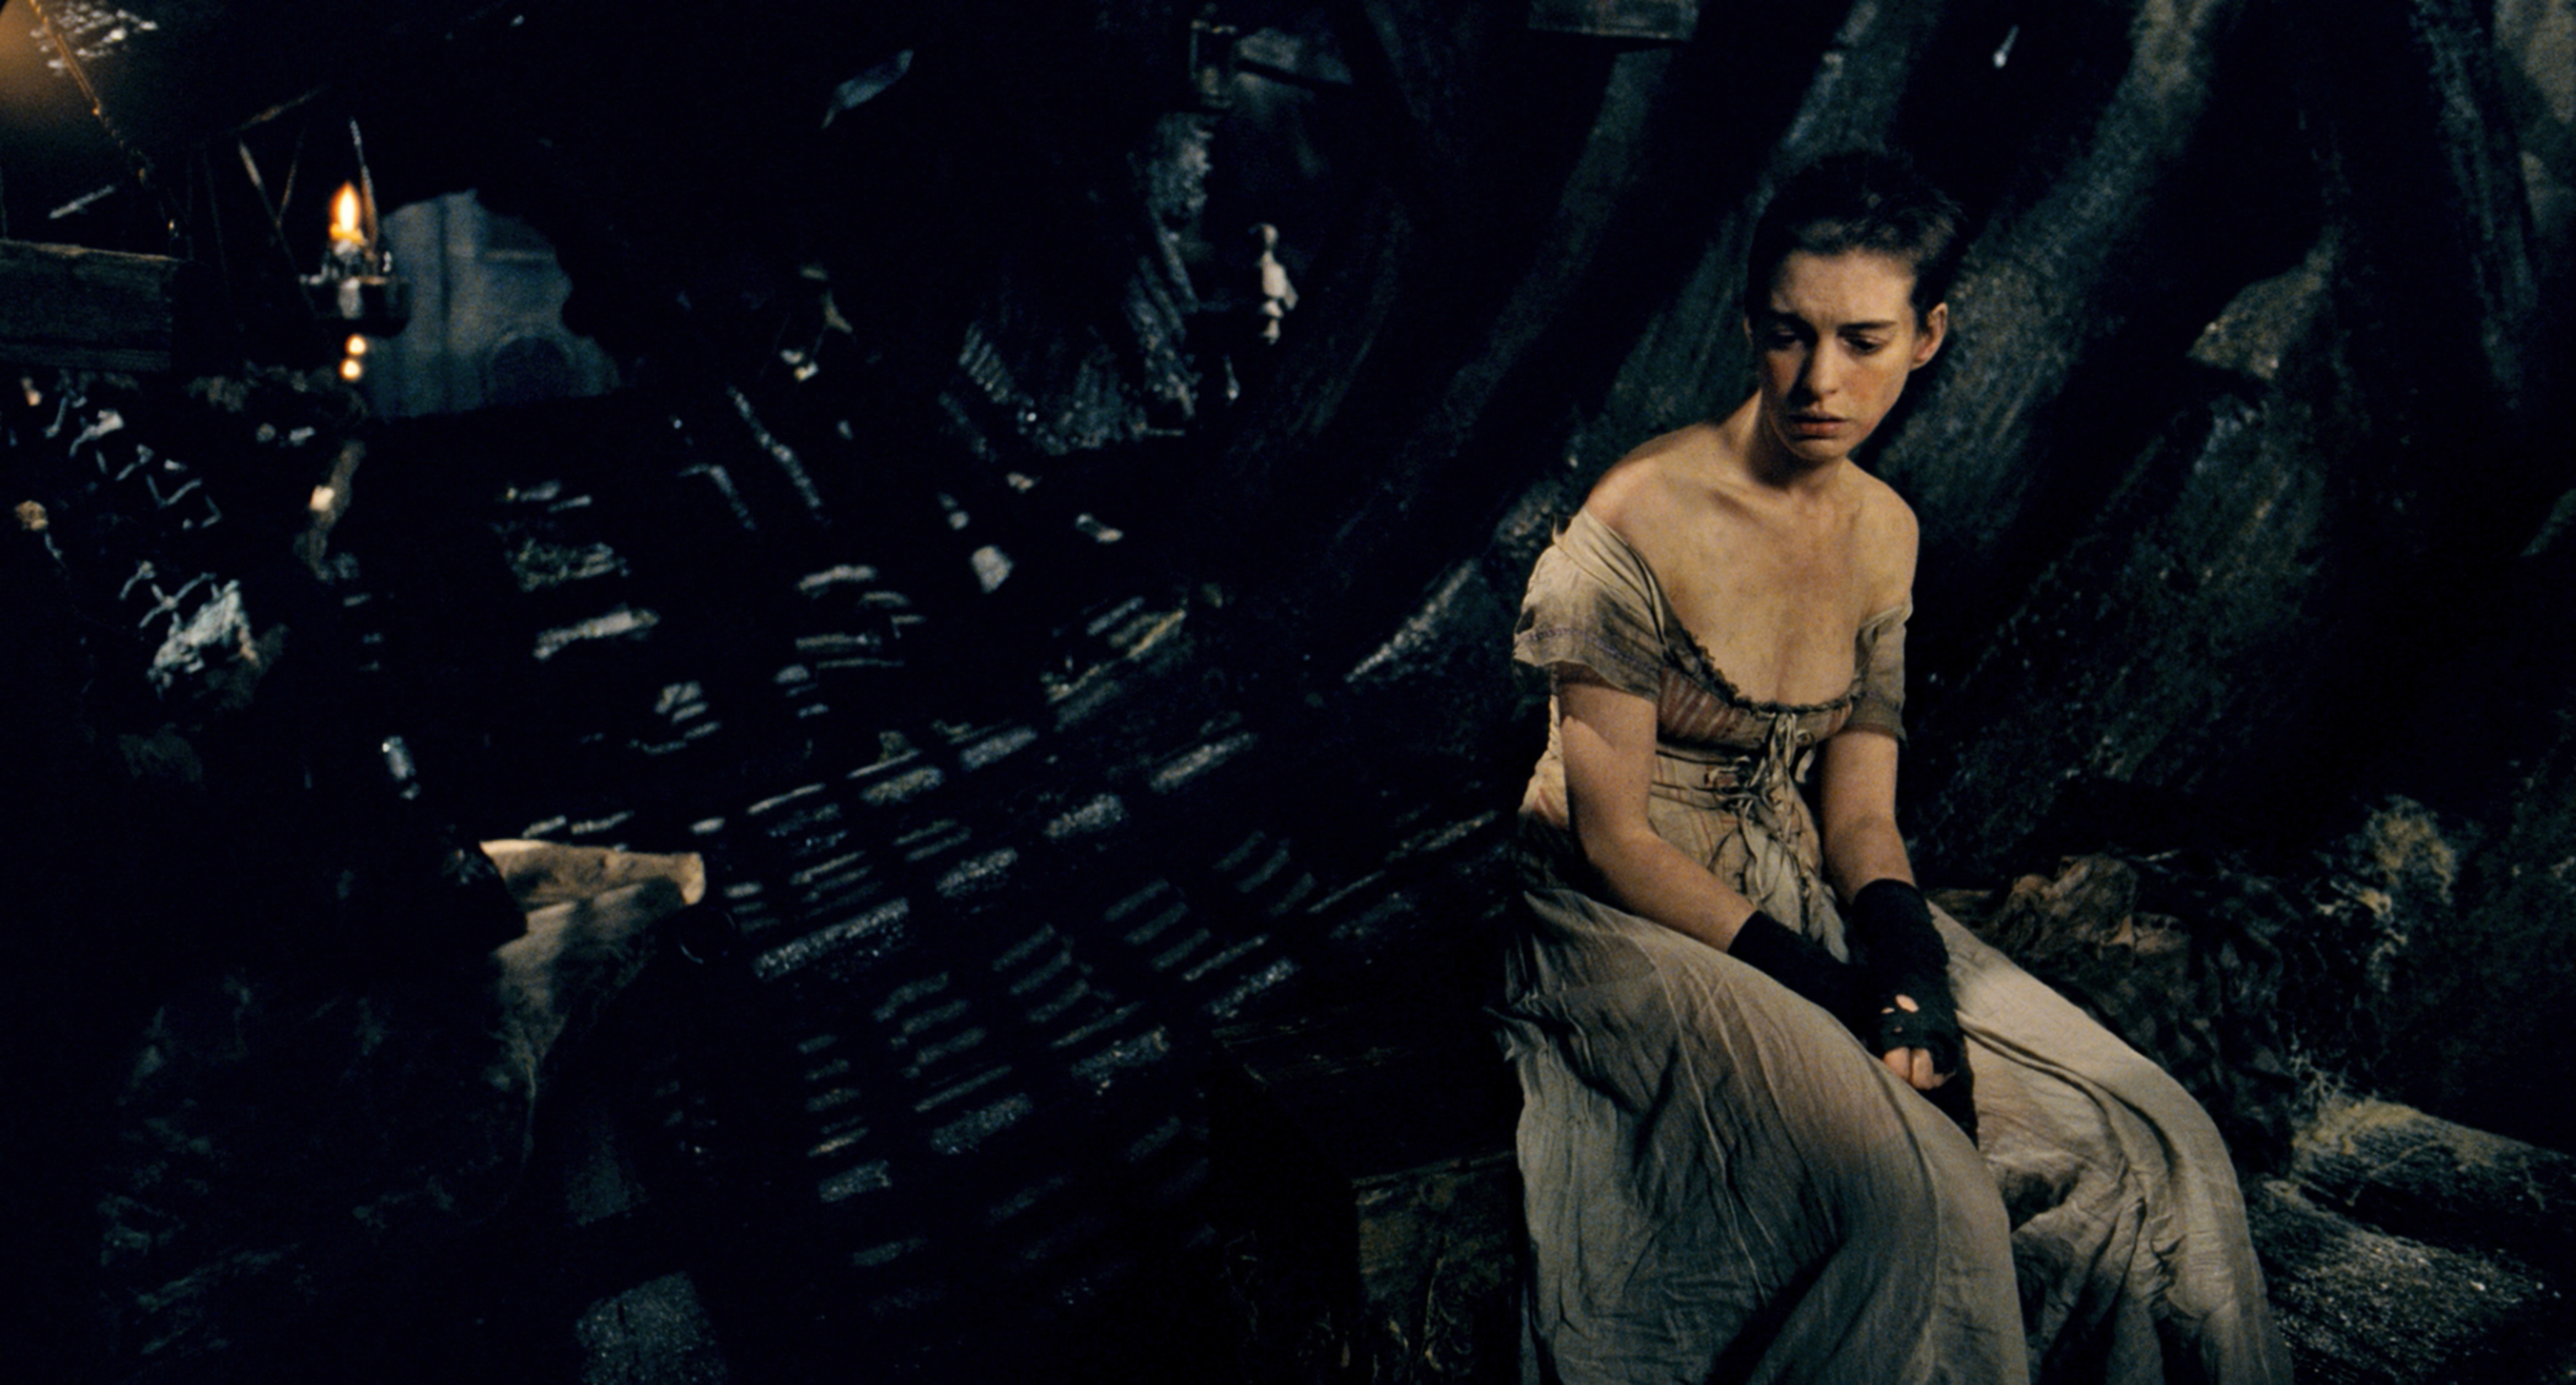 anne in the film, looking very malnourished for her character